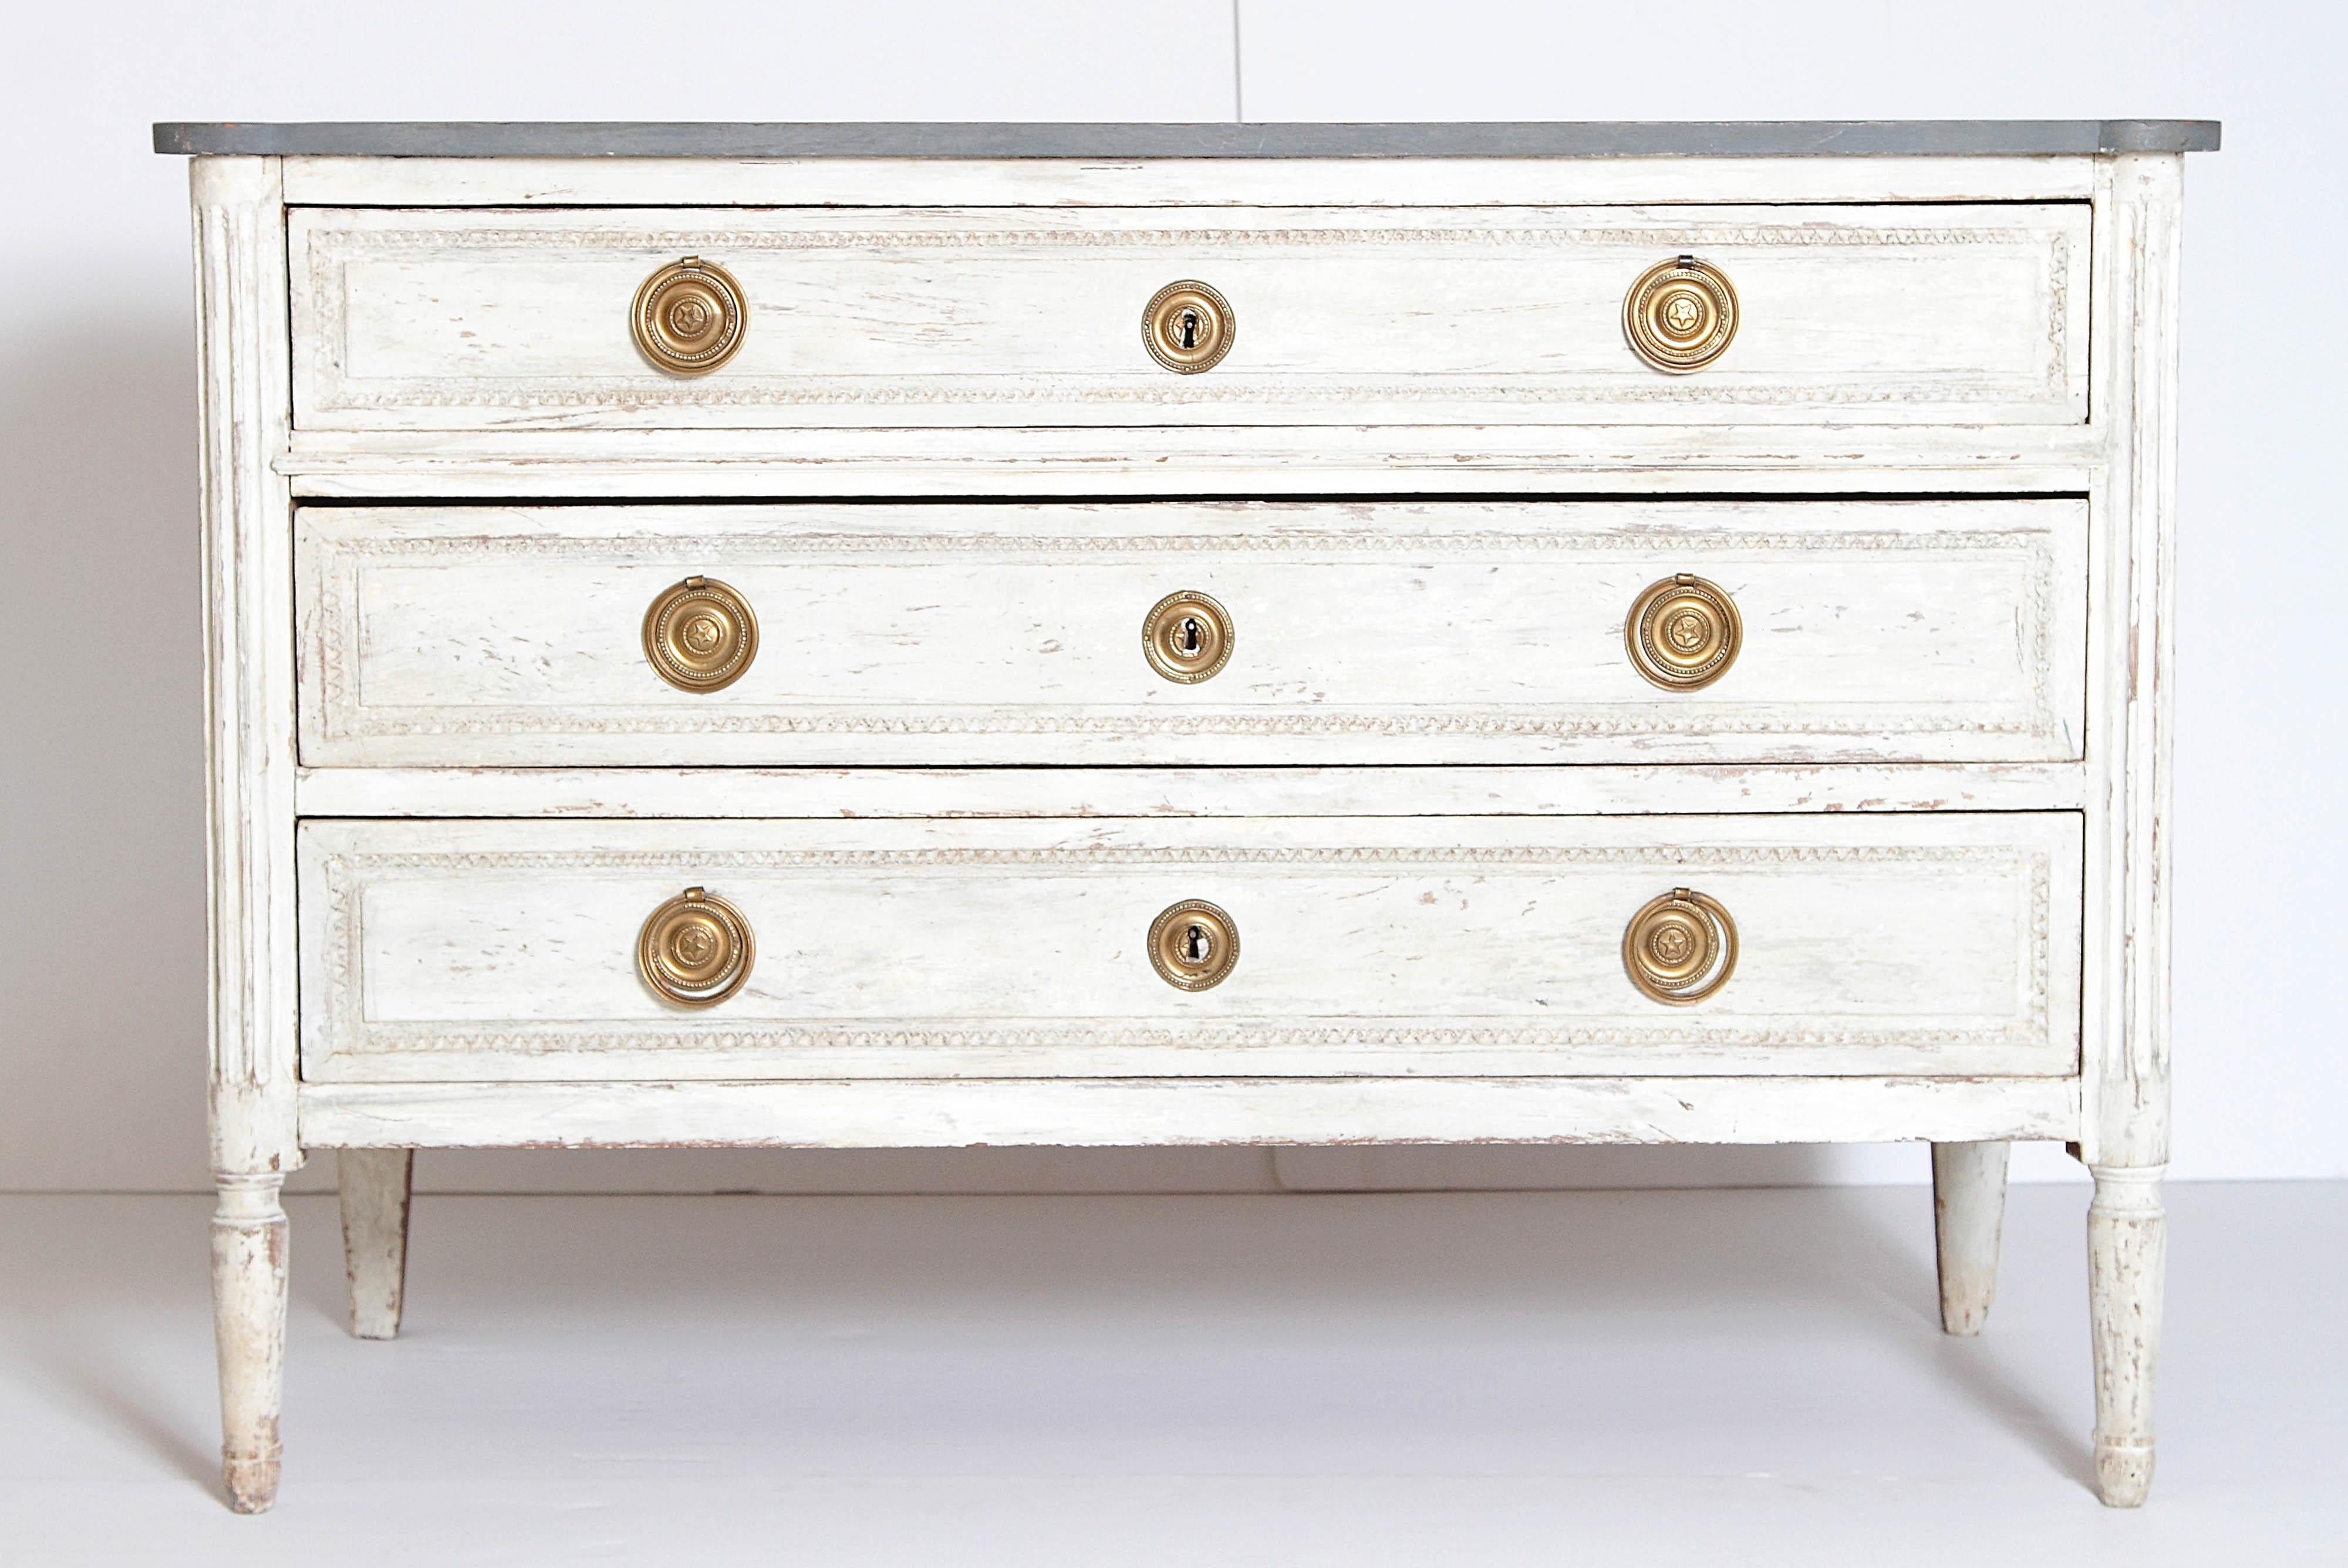 An 19th century antique Swedish Louis XVI style chest of drawers topped with a painted grey wood top. Fluted columns frame the three drawers with carvings. The fluted columns terminate in round fluted legs. Three drawers with round metal pulls with